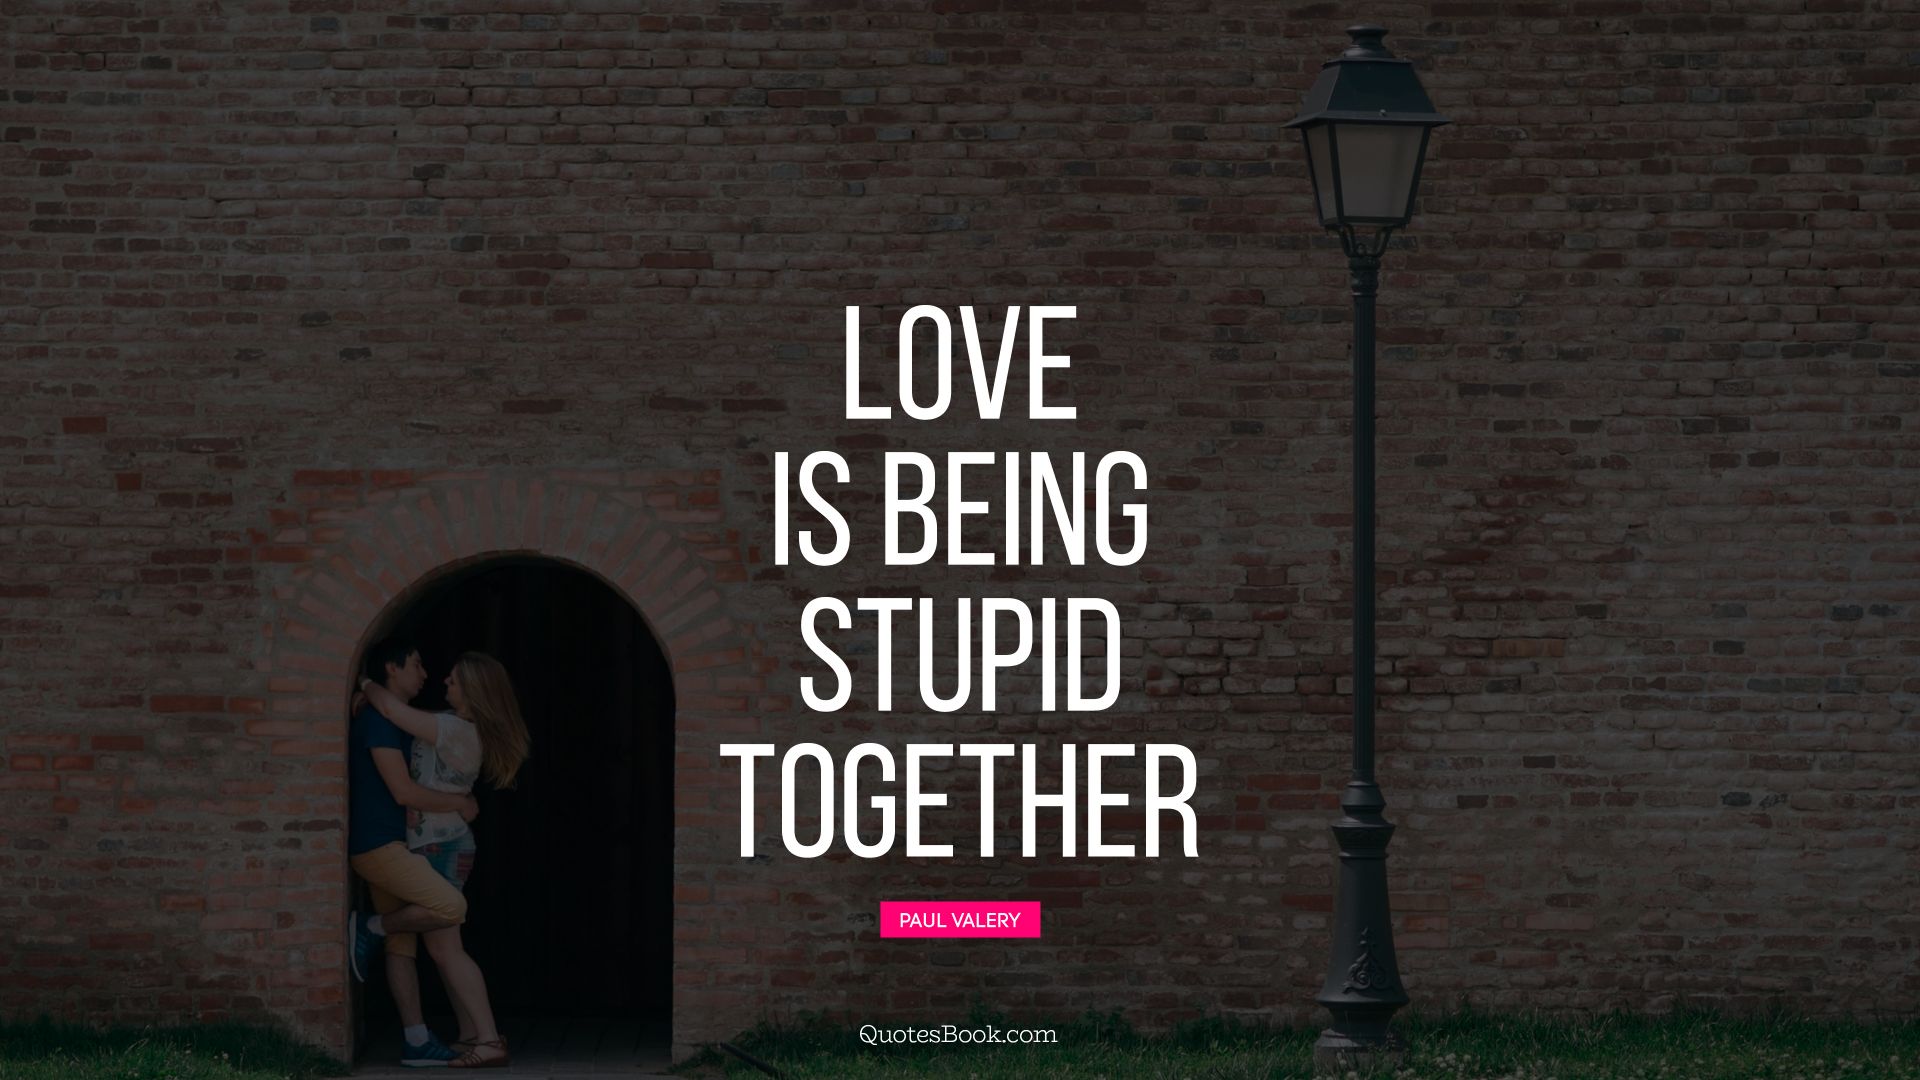 Love is being stupid together. - Quote by Paul Valery